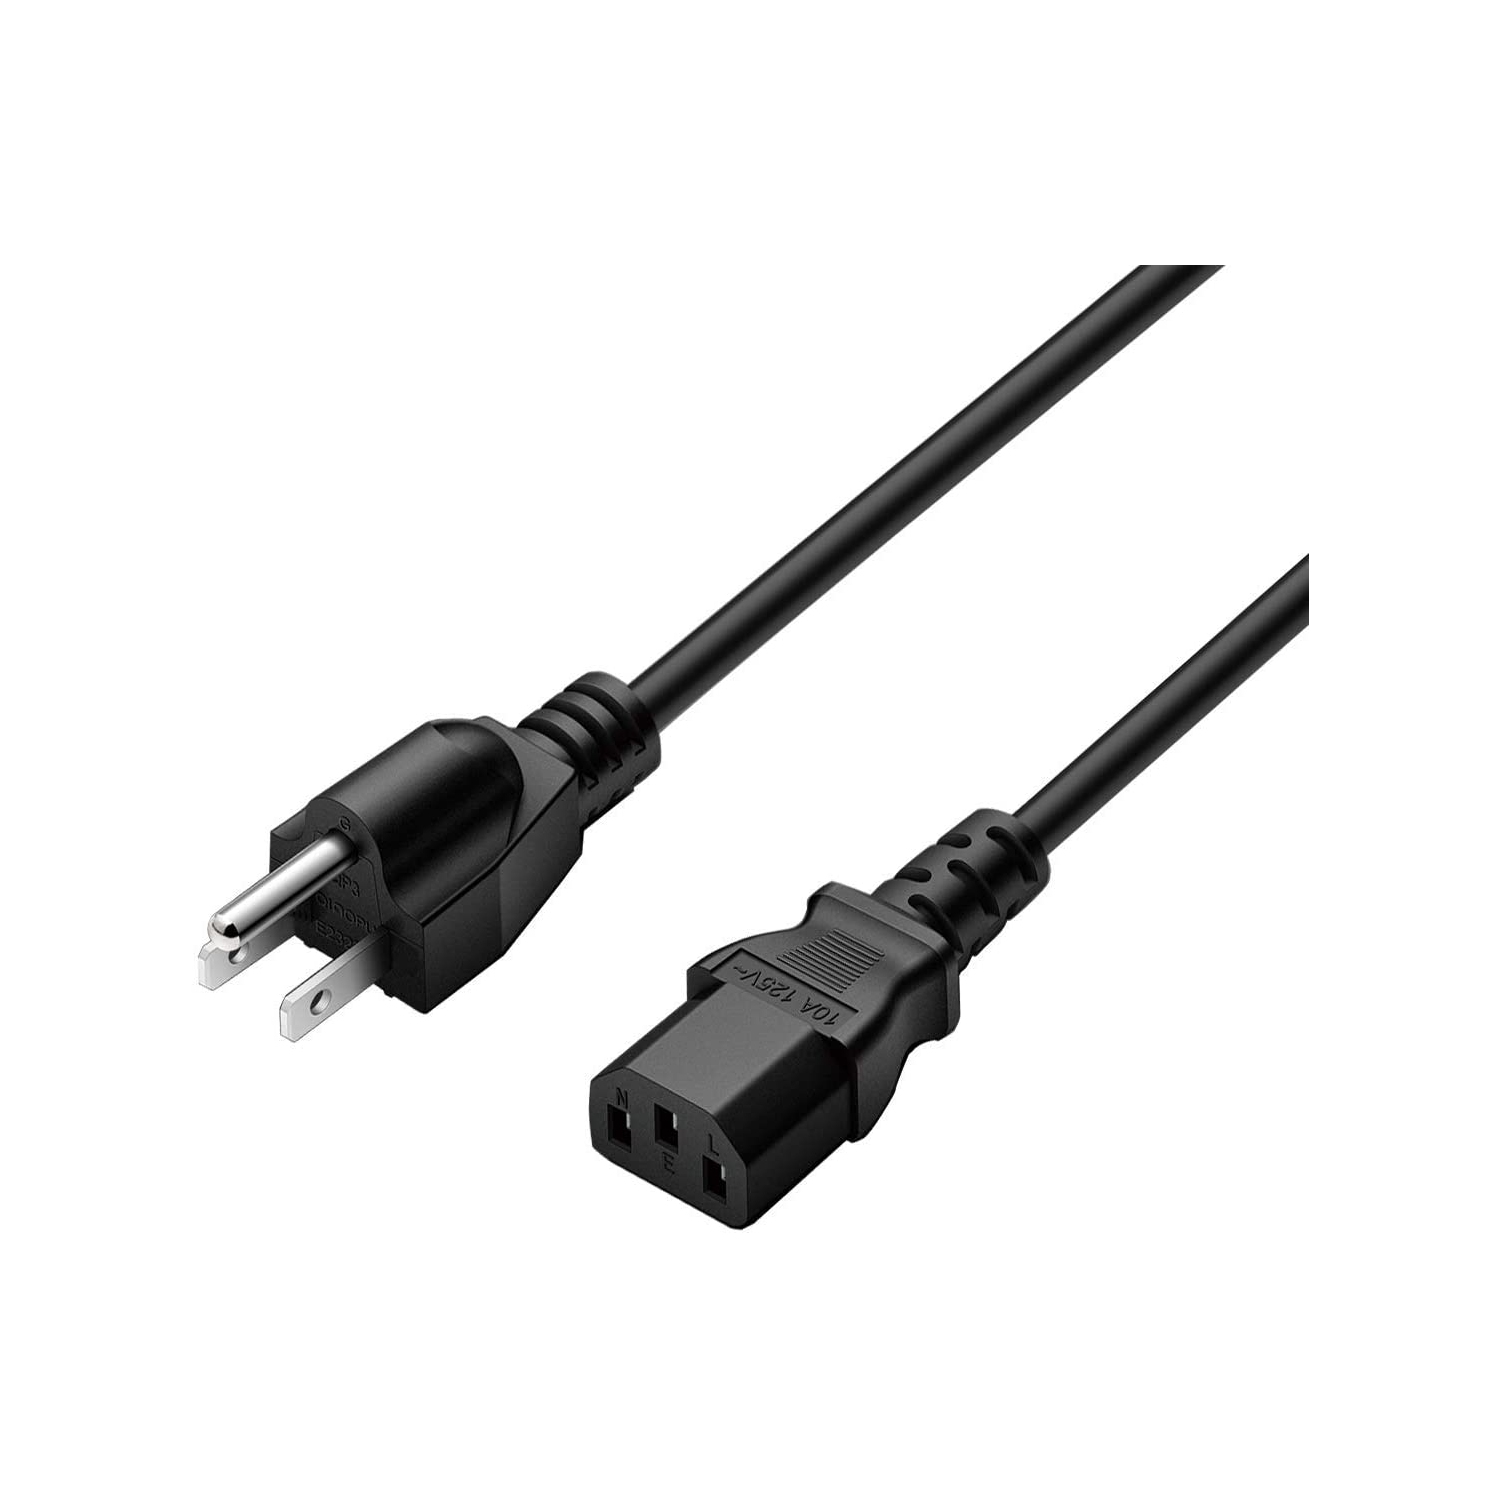 3 Prong Universal Power Cord Cable Fit for Vizio Brother Lenovo Personal Computer, PC Monitor, Bravia Smart TV,